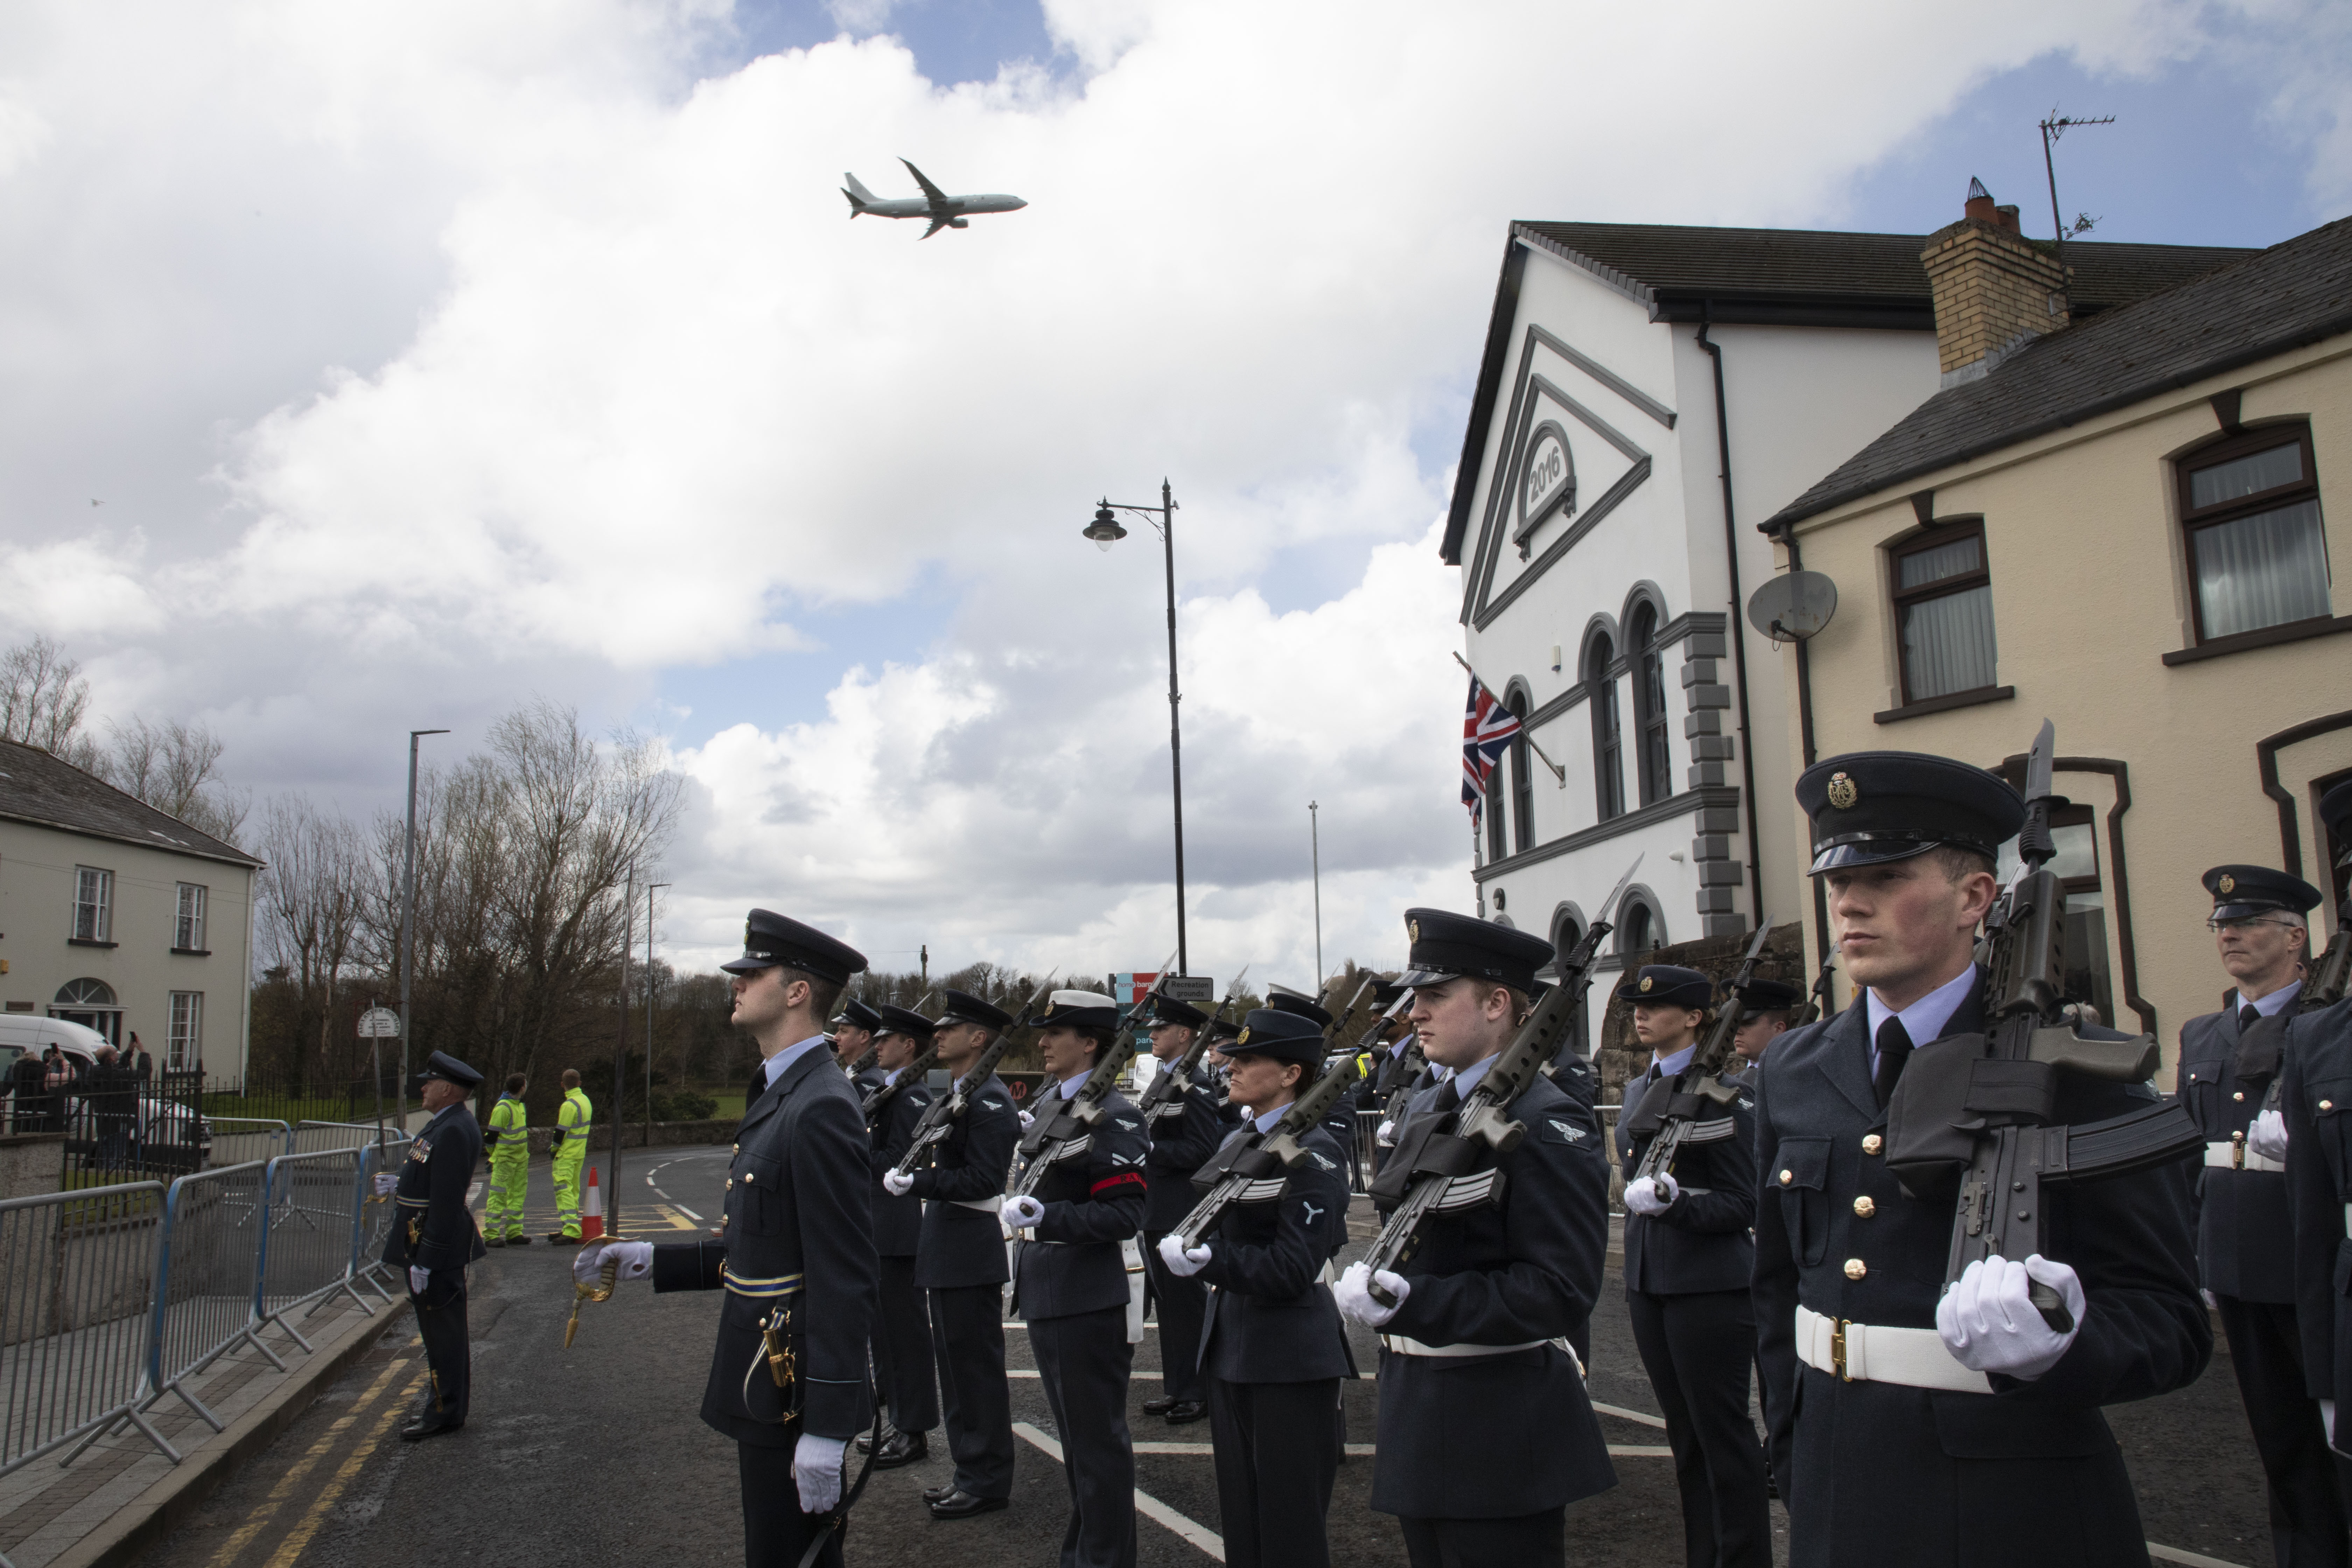 Personnel parade through the streets with Poseidon flypast.